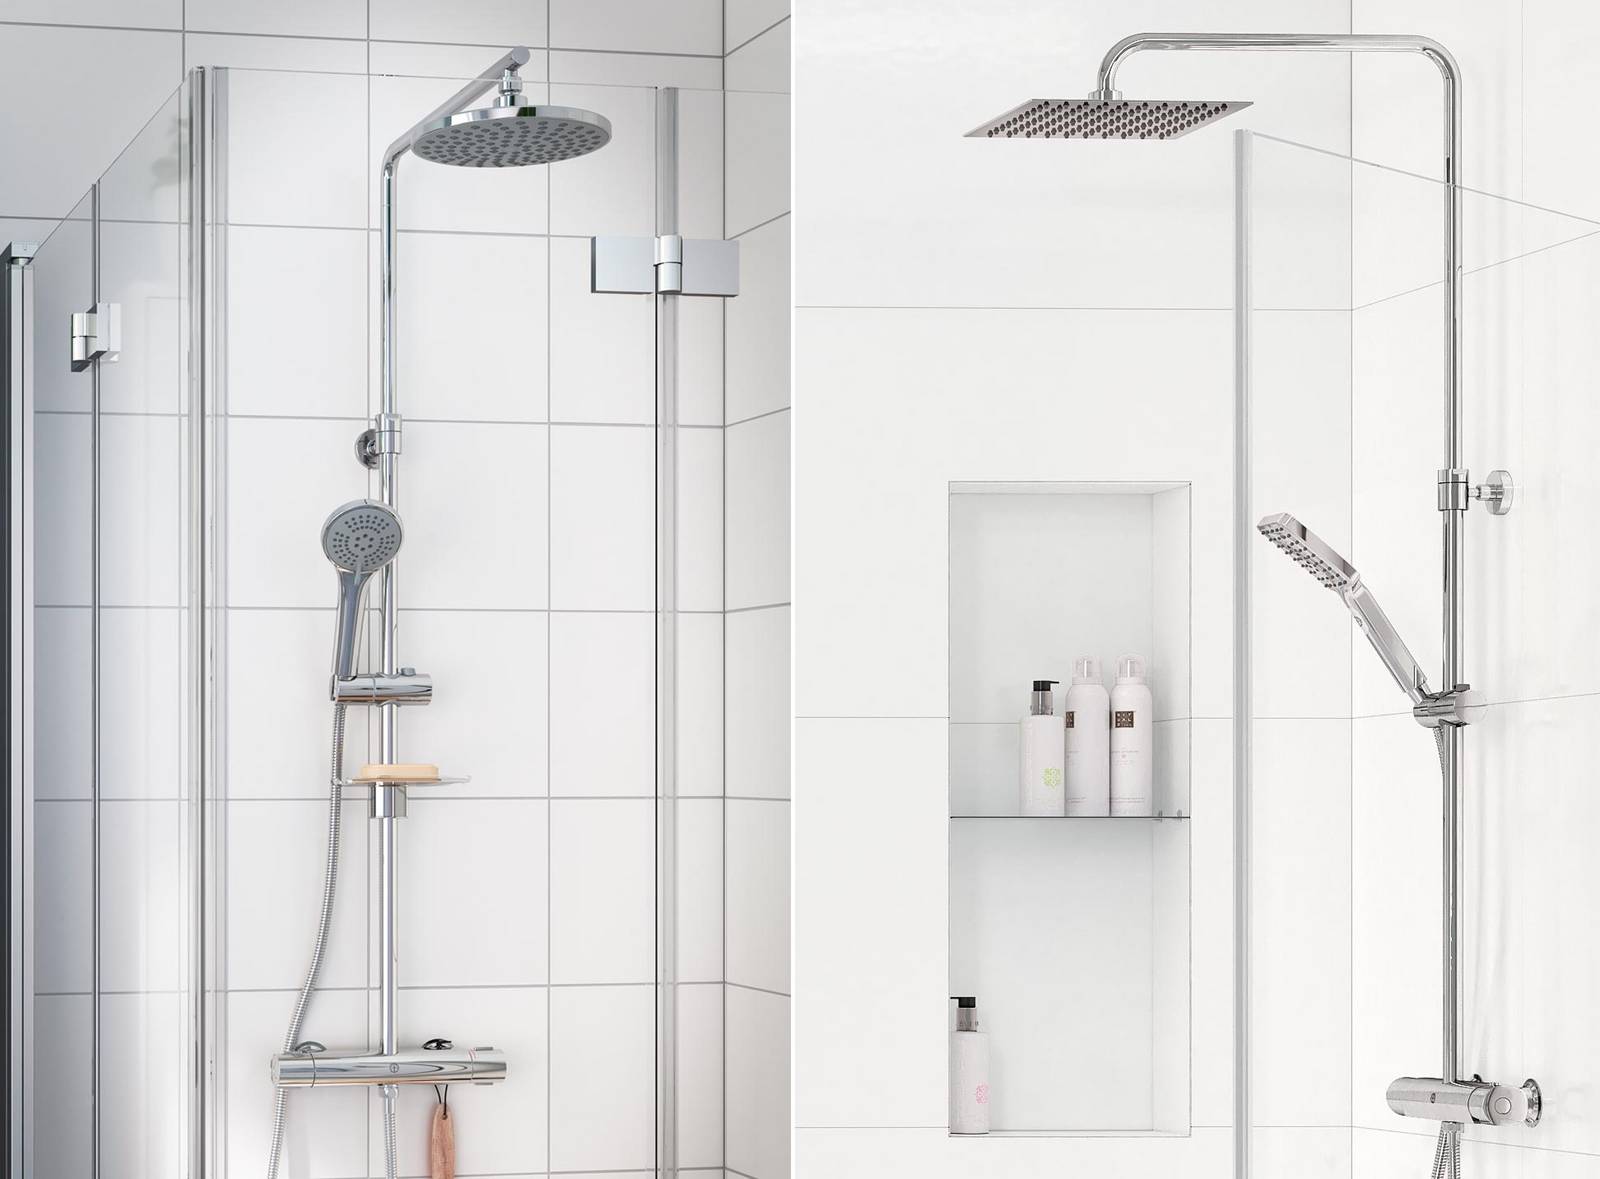 [Translate to Estonian:] Combine shower mixer and roof shower set